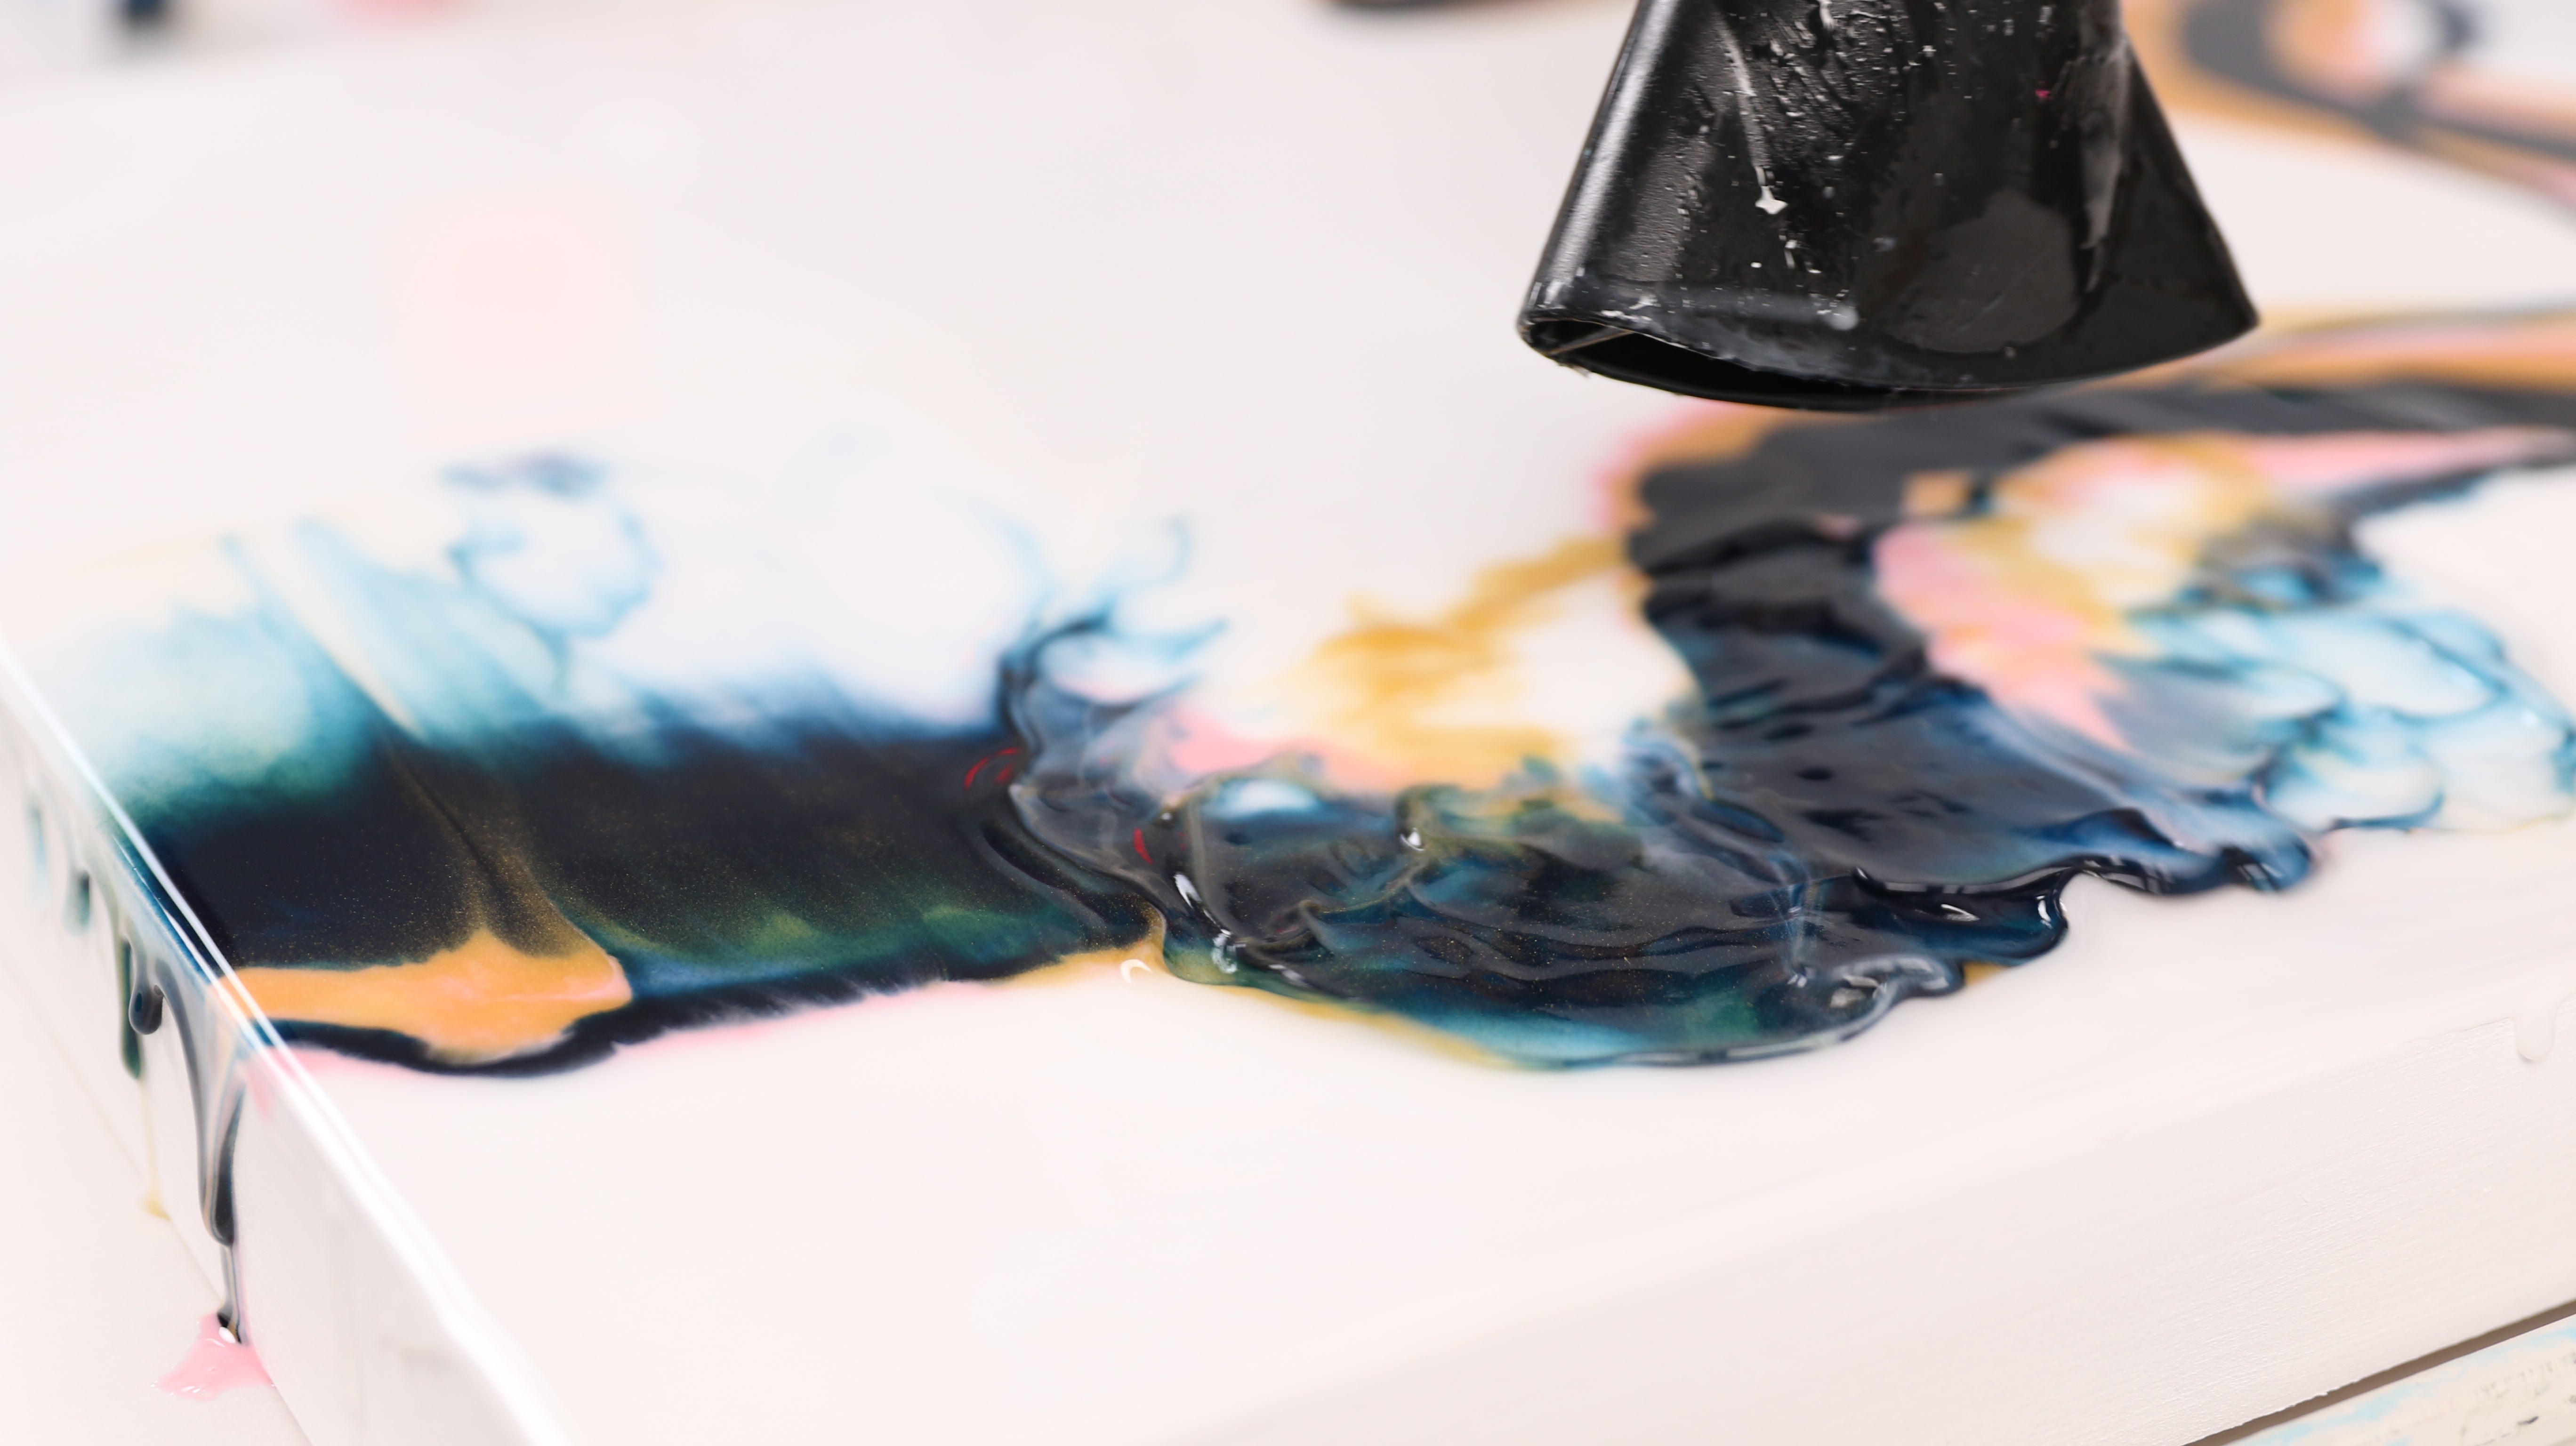 use a blow dryer to blow the resin around to create dutch pour design